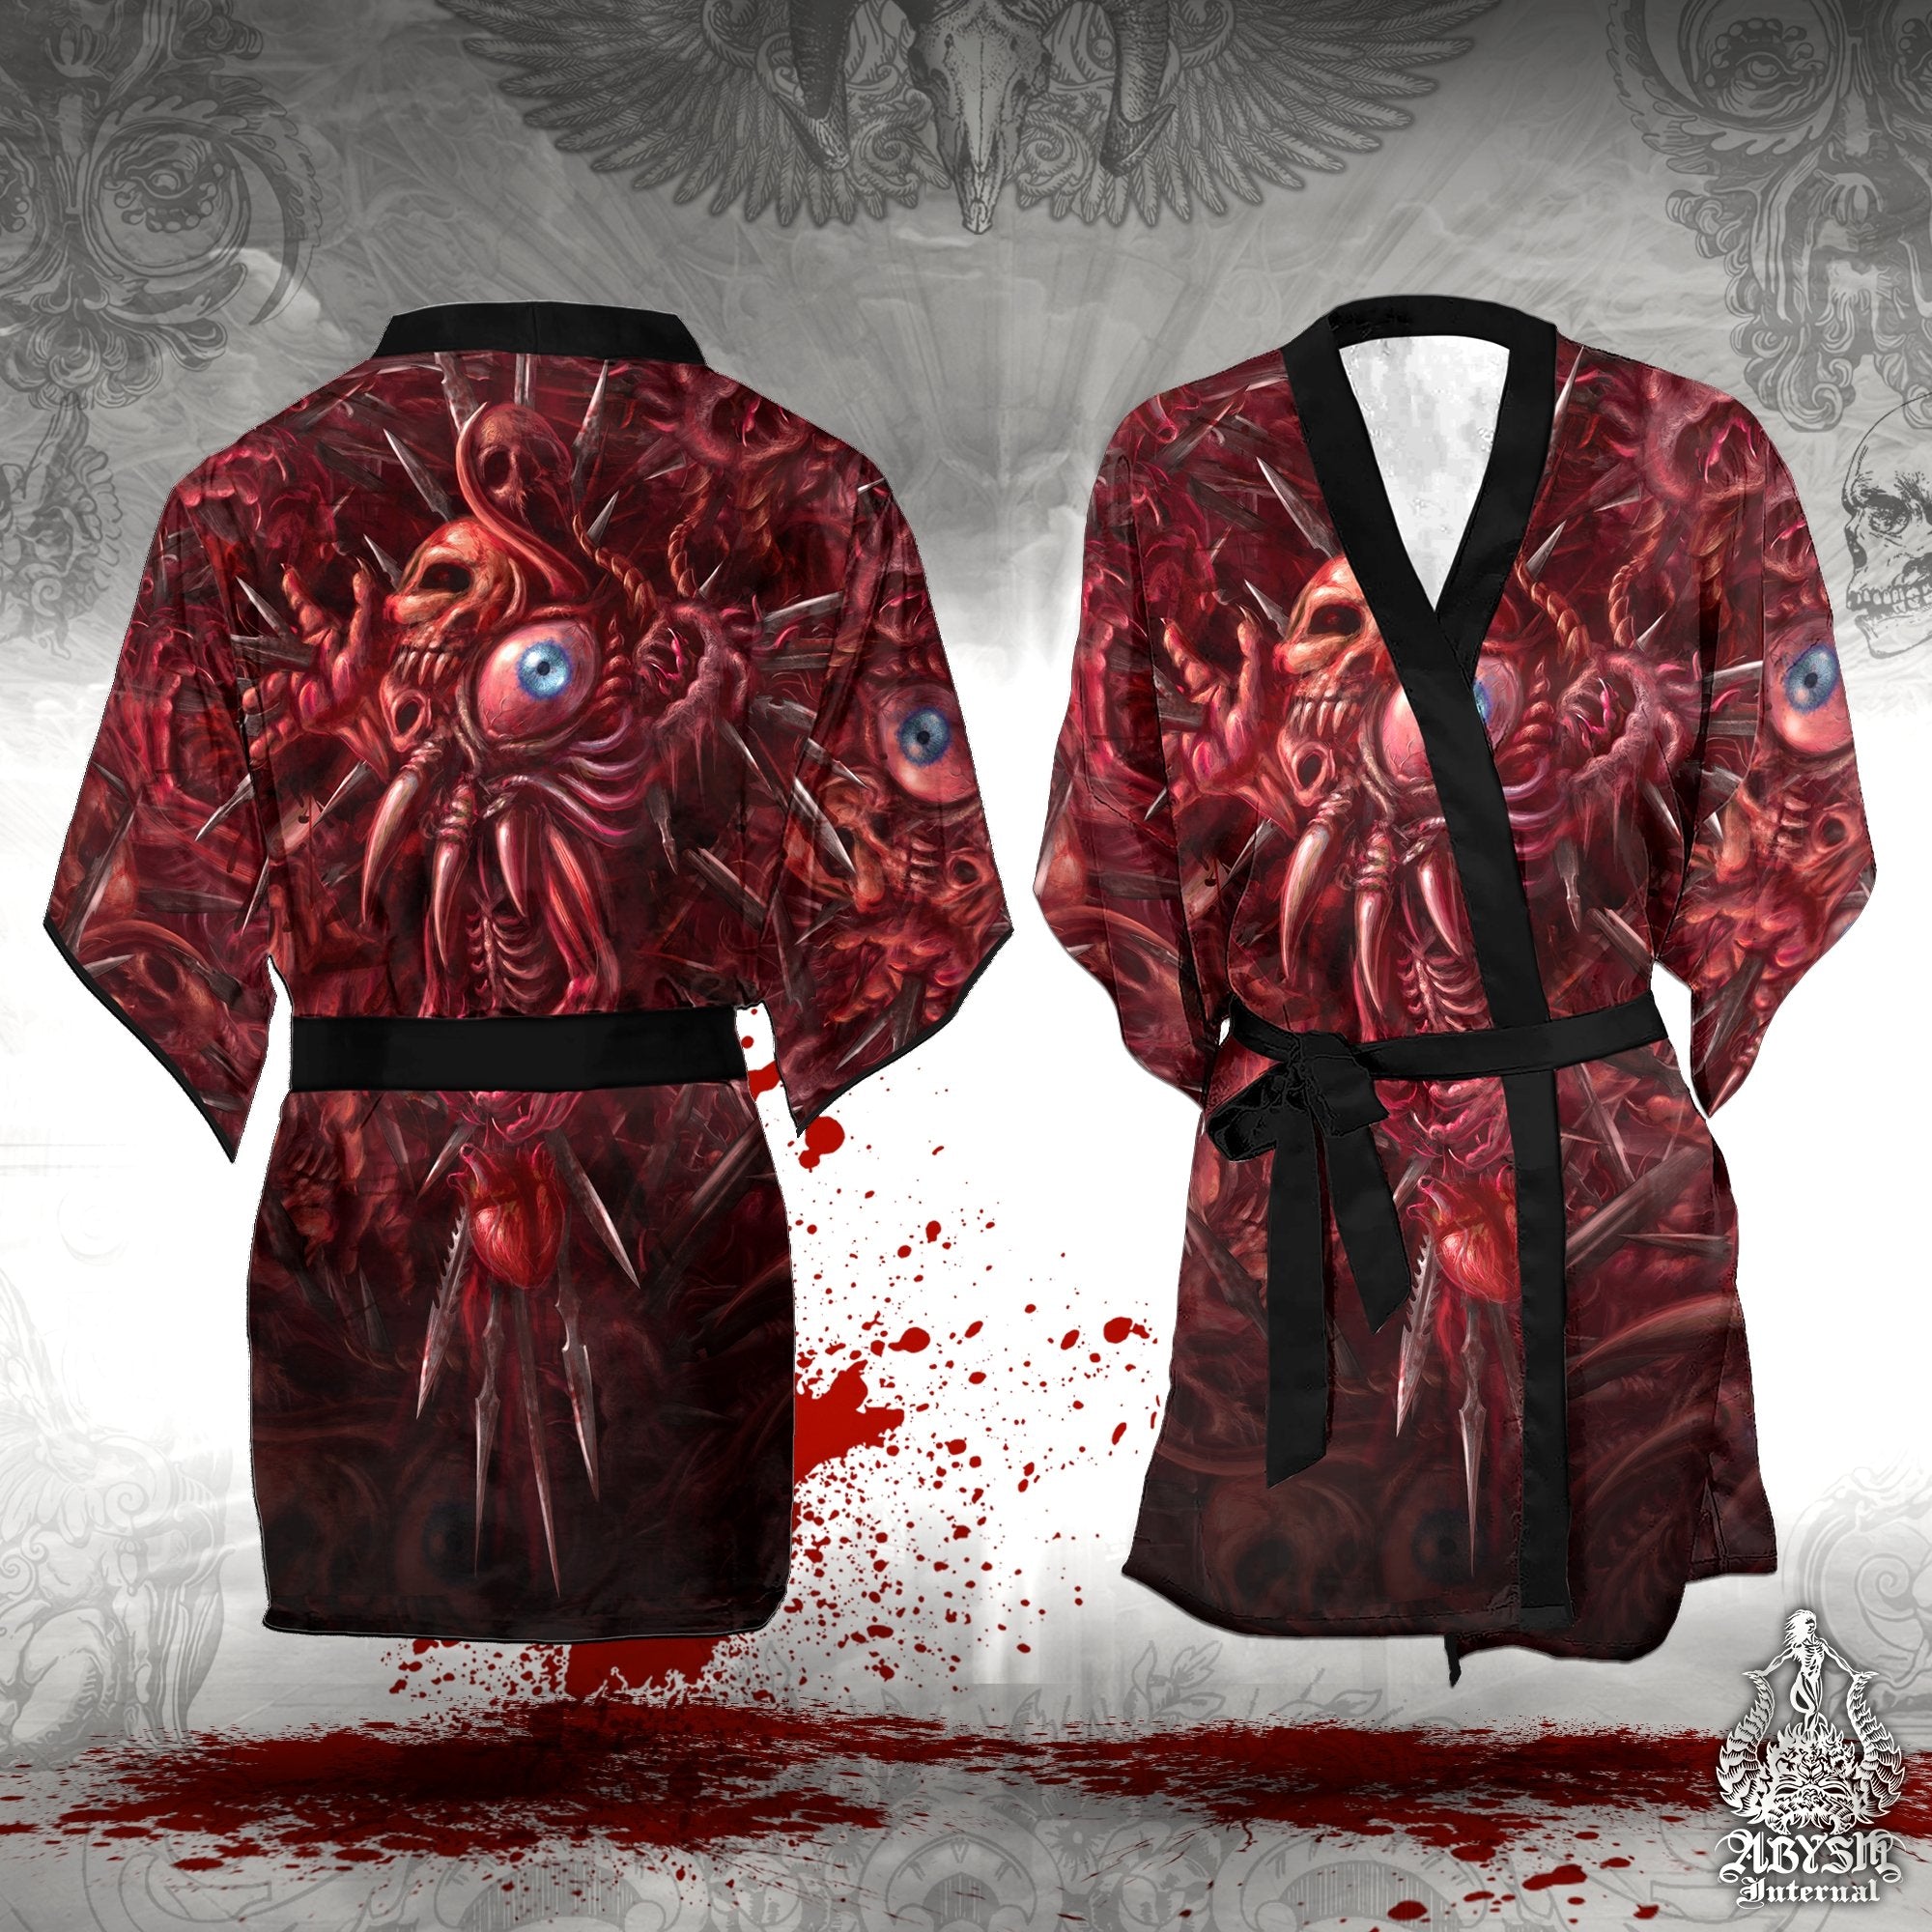 Horror Cover Up, Beach Outfit, Party Kimono, Halloween Summer Festival Robe, Indie and Alternative Clothing, Unisex - Gore and Blood Cross - Abysm Internal